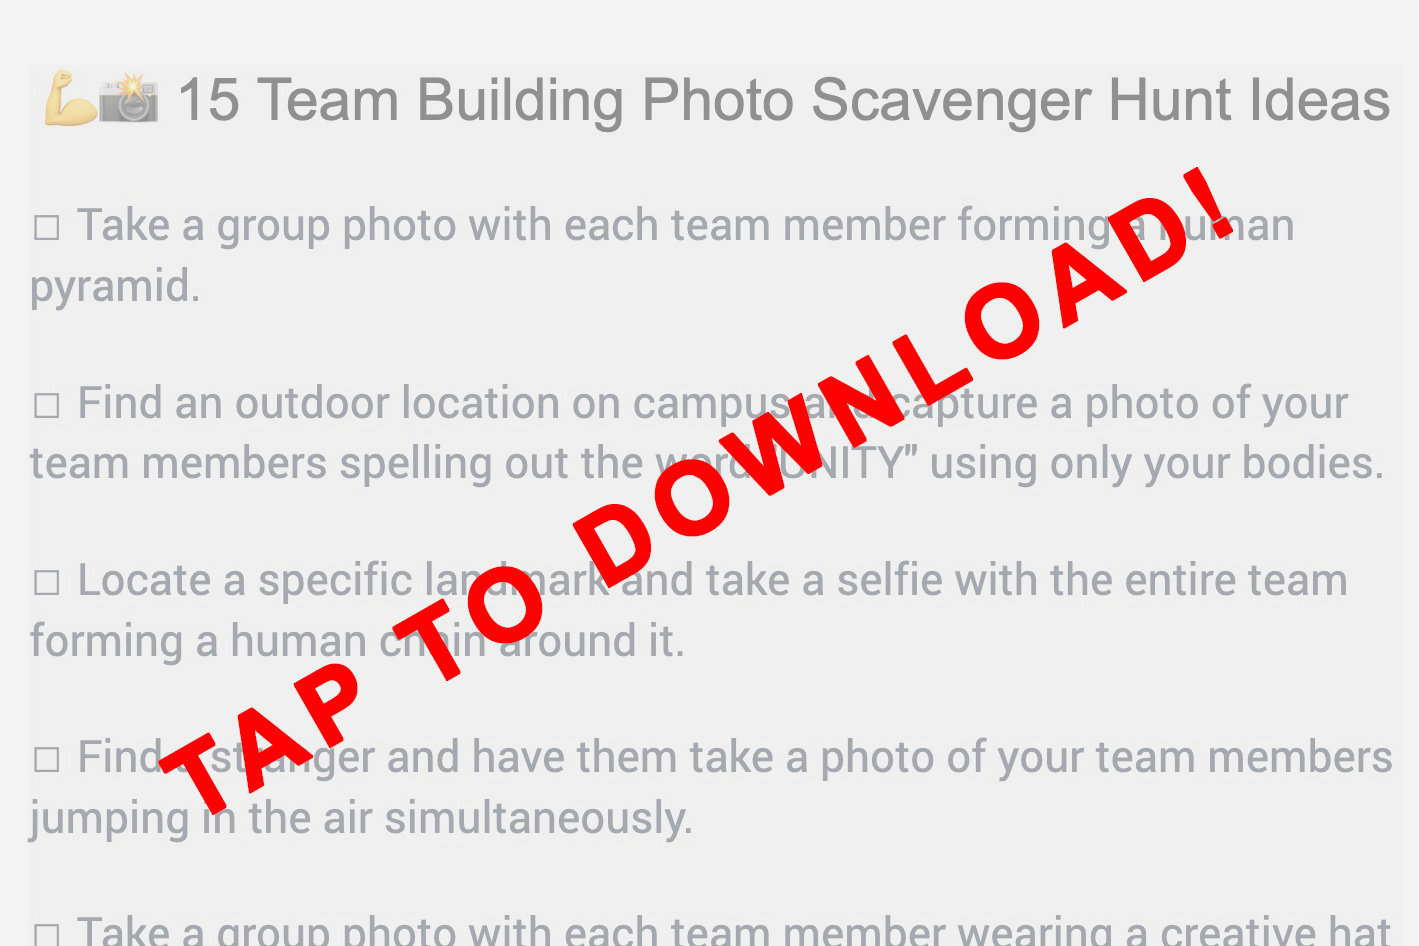 a picture of a team building photo scavenger hunt.